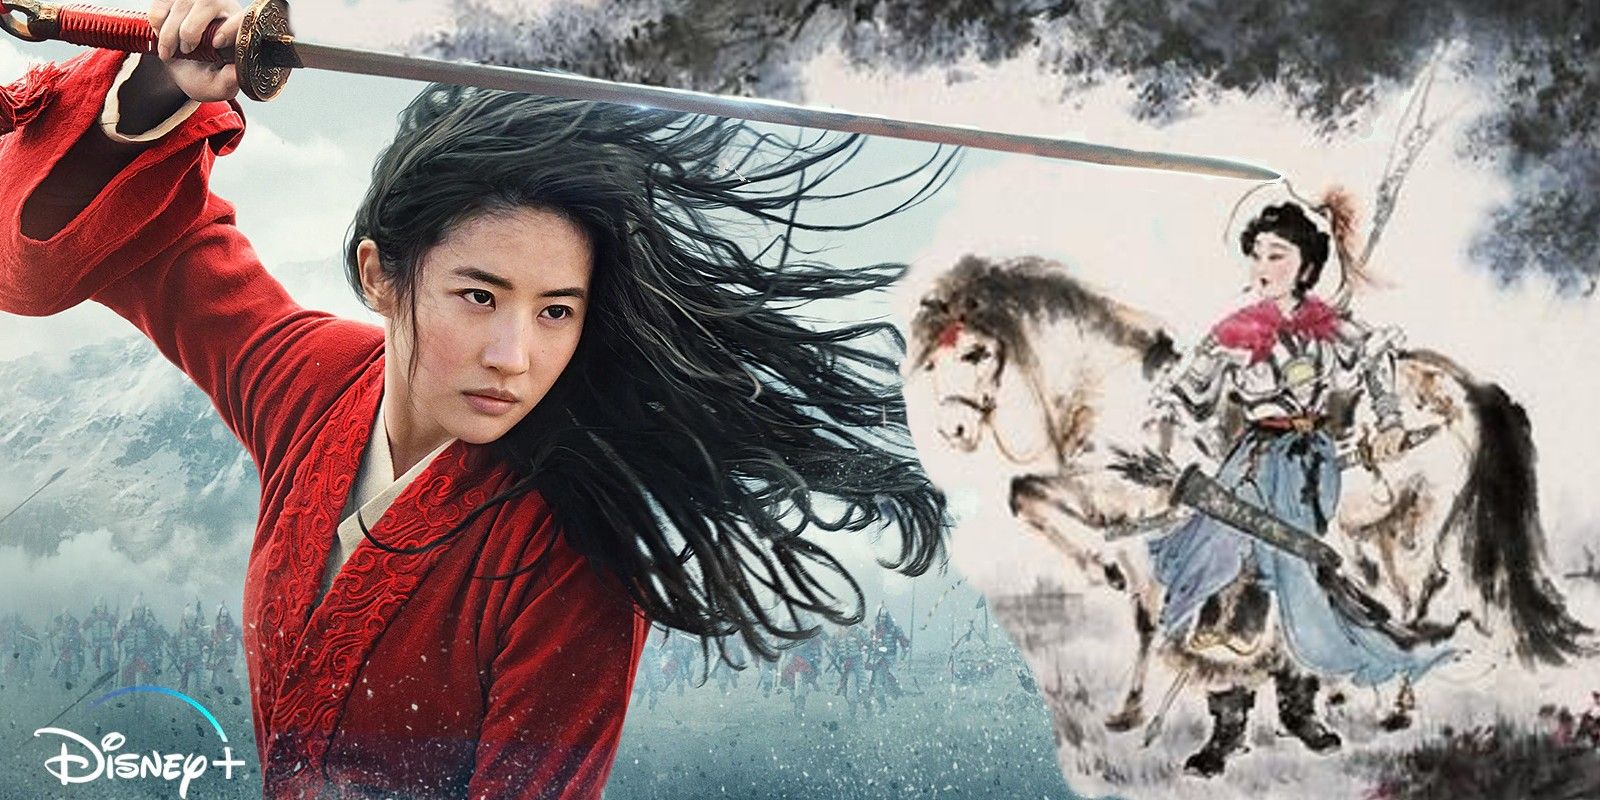 Mulan 2020 holding a sword and Chinese poem image